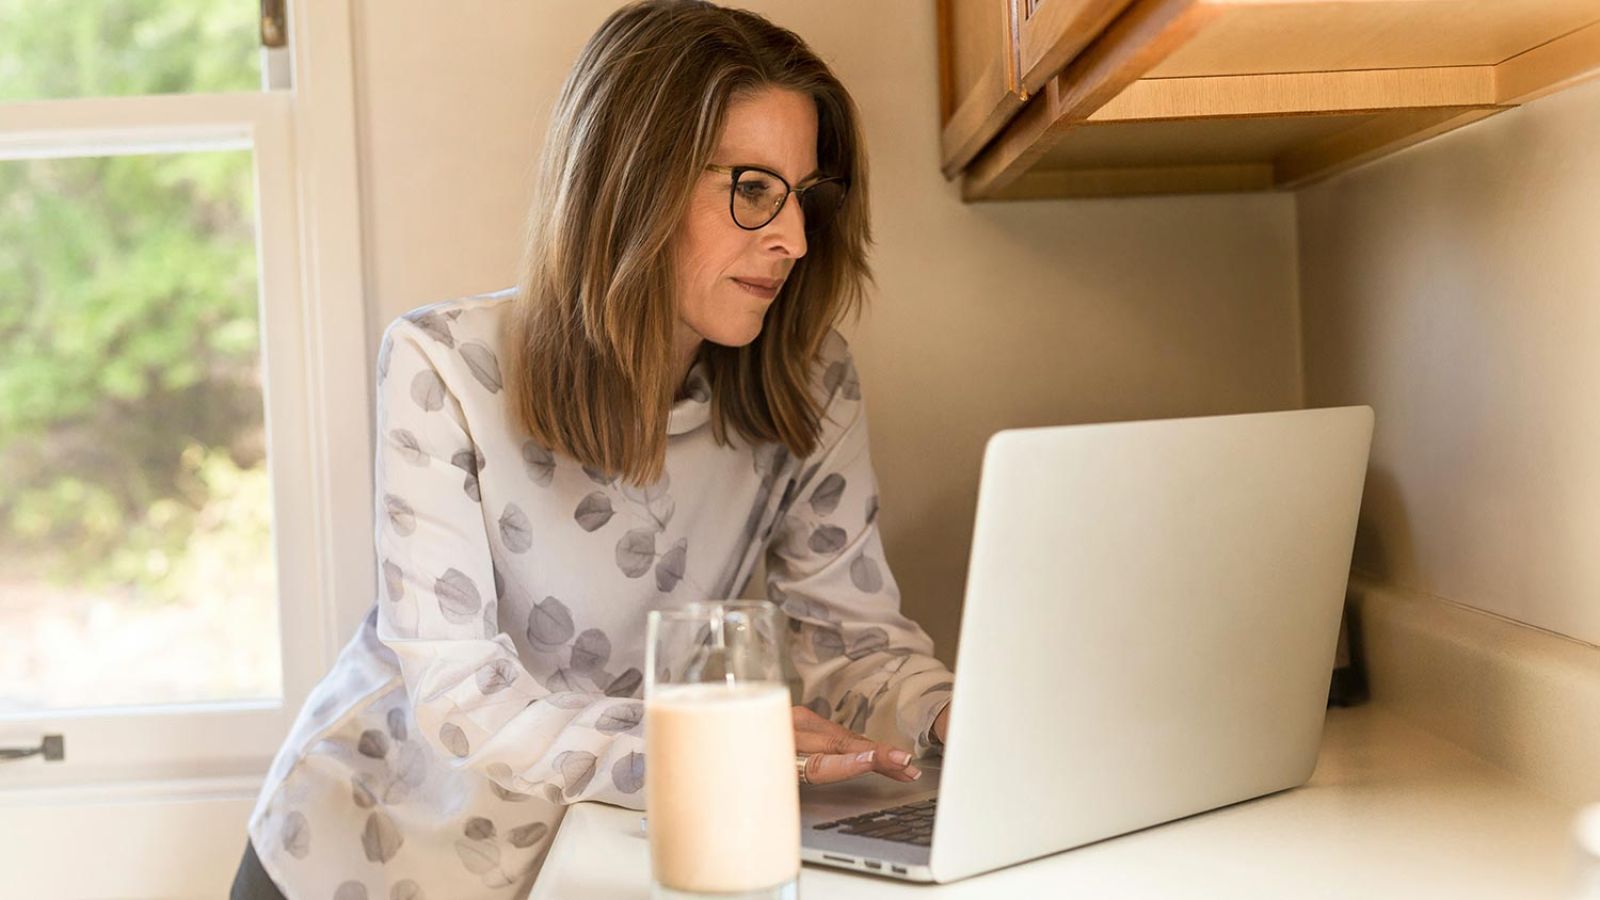 Woman using her computer in the kitchen counter drinking a glass of milk